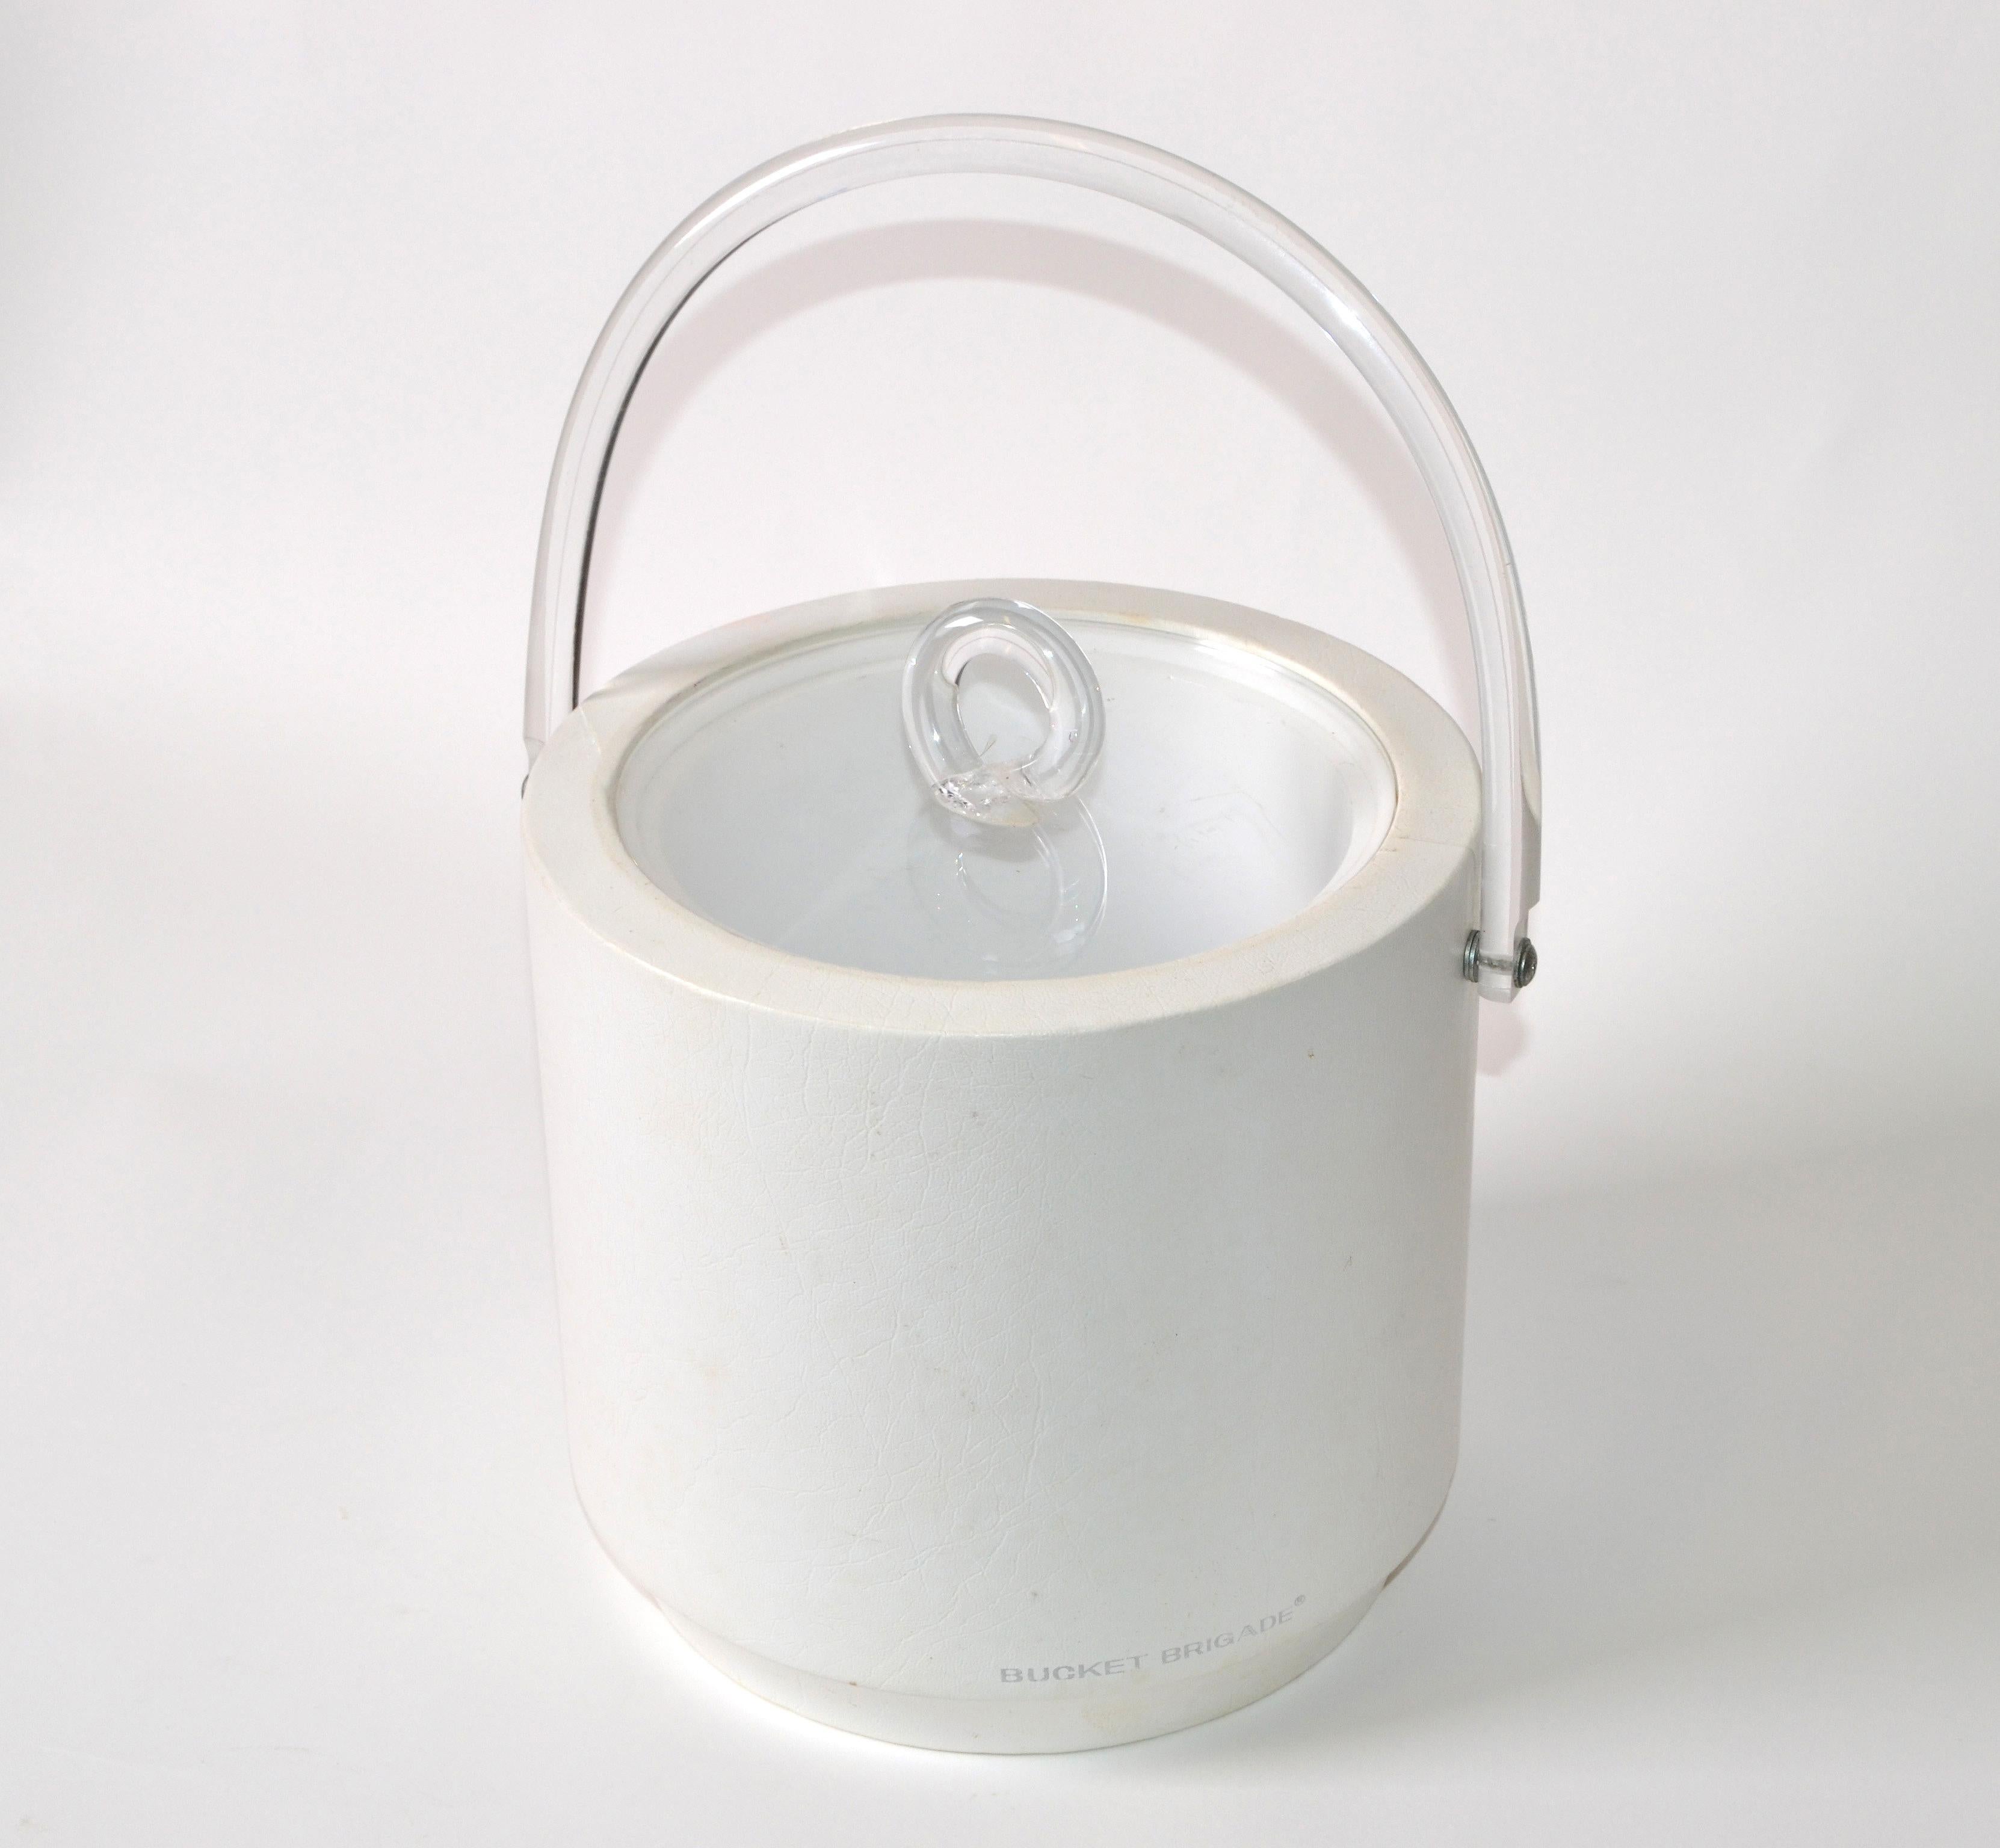 1970s off white Leather and Lucite ice bucket the inside is insulated and decorative lid.
Keeps the ice cubes frozen for a long time as the lid sits tight on the bucket.
Makers Mark Bucket Brigade at the base.
      